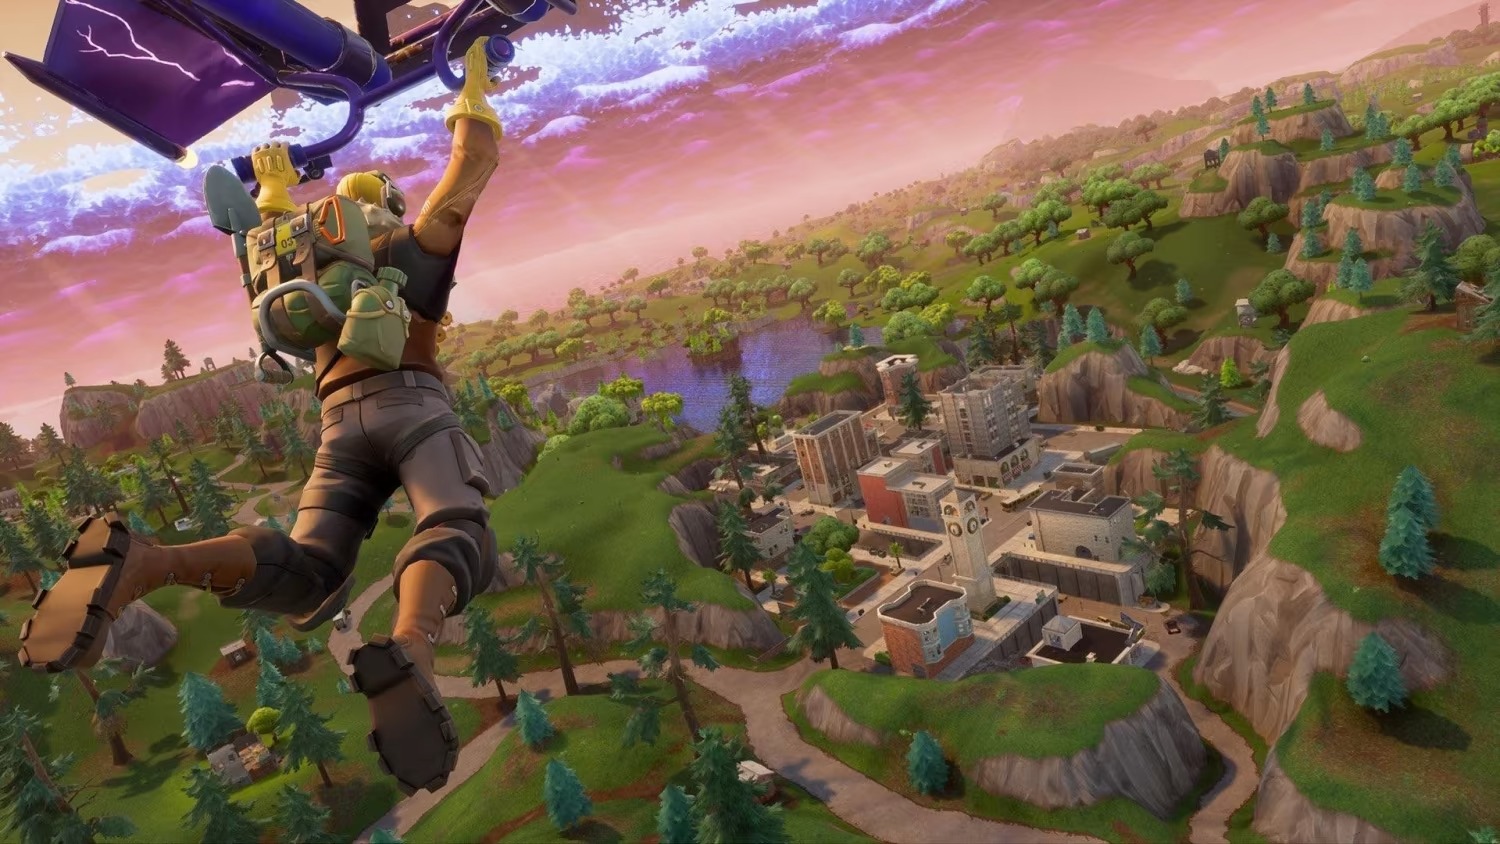 In this article, we will tell you where to get jetpack Fortnite, how to use it, and how to refuel it, so you can dominate the battle from the skies.